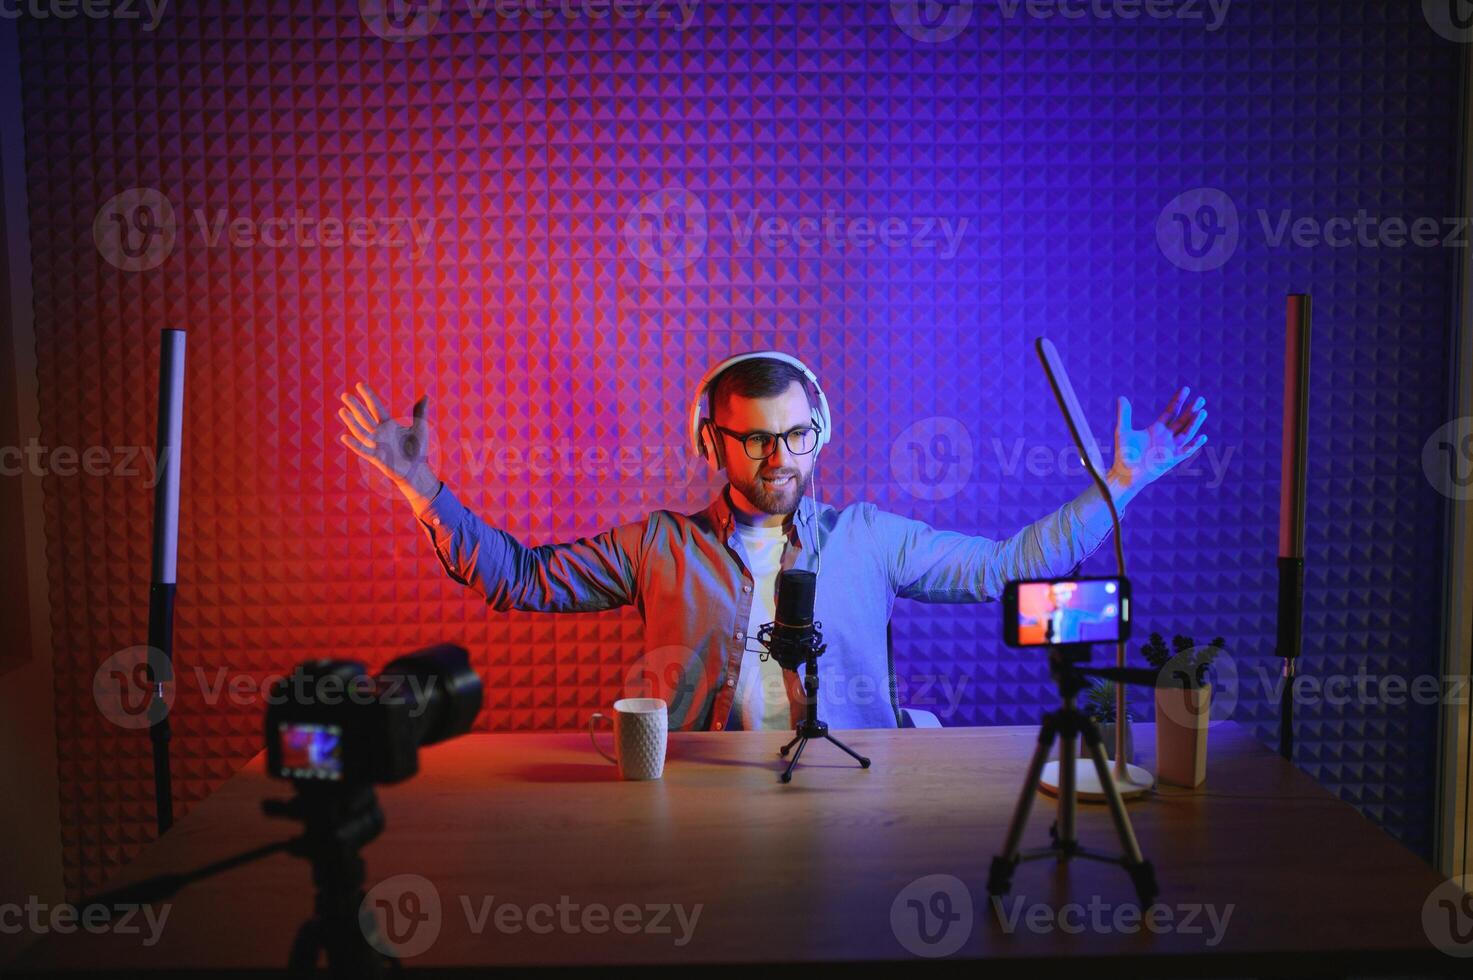 vlogger using smartphone to film podcast in studio. blogger with mobile phone, microphone and headphones filming video for social media broadcasting career. photo